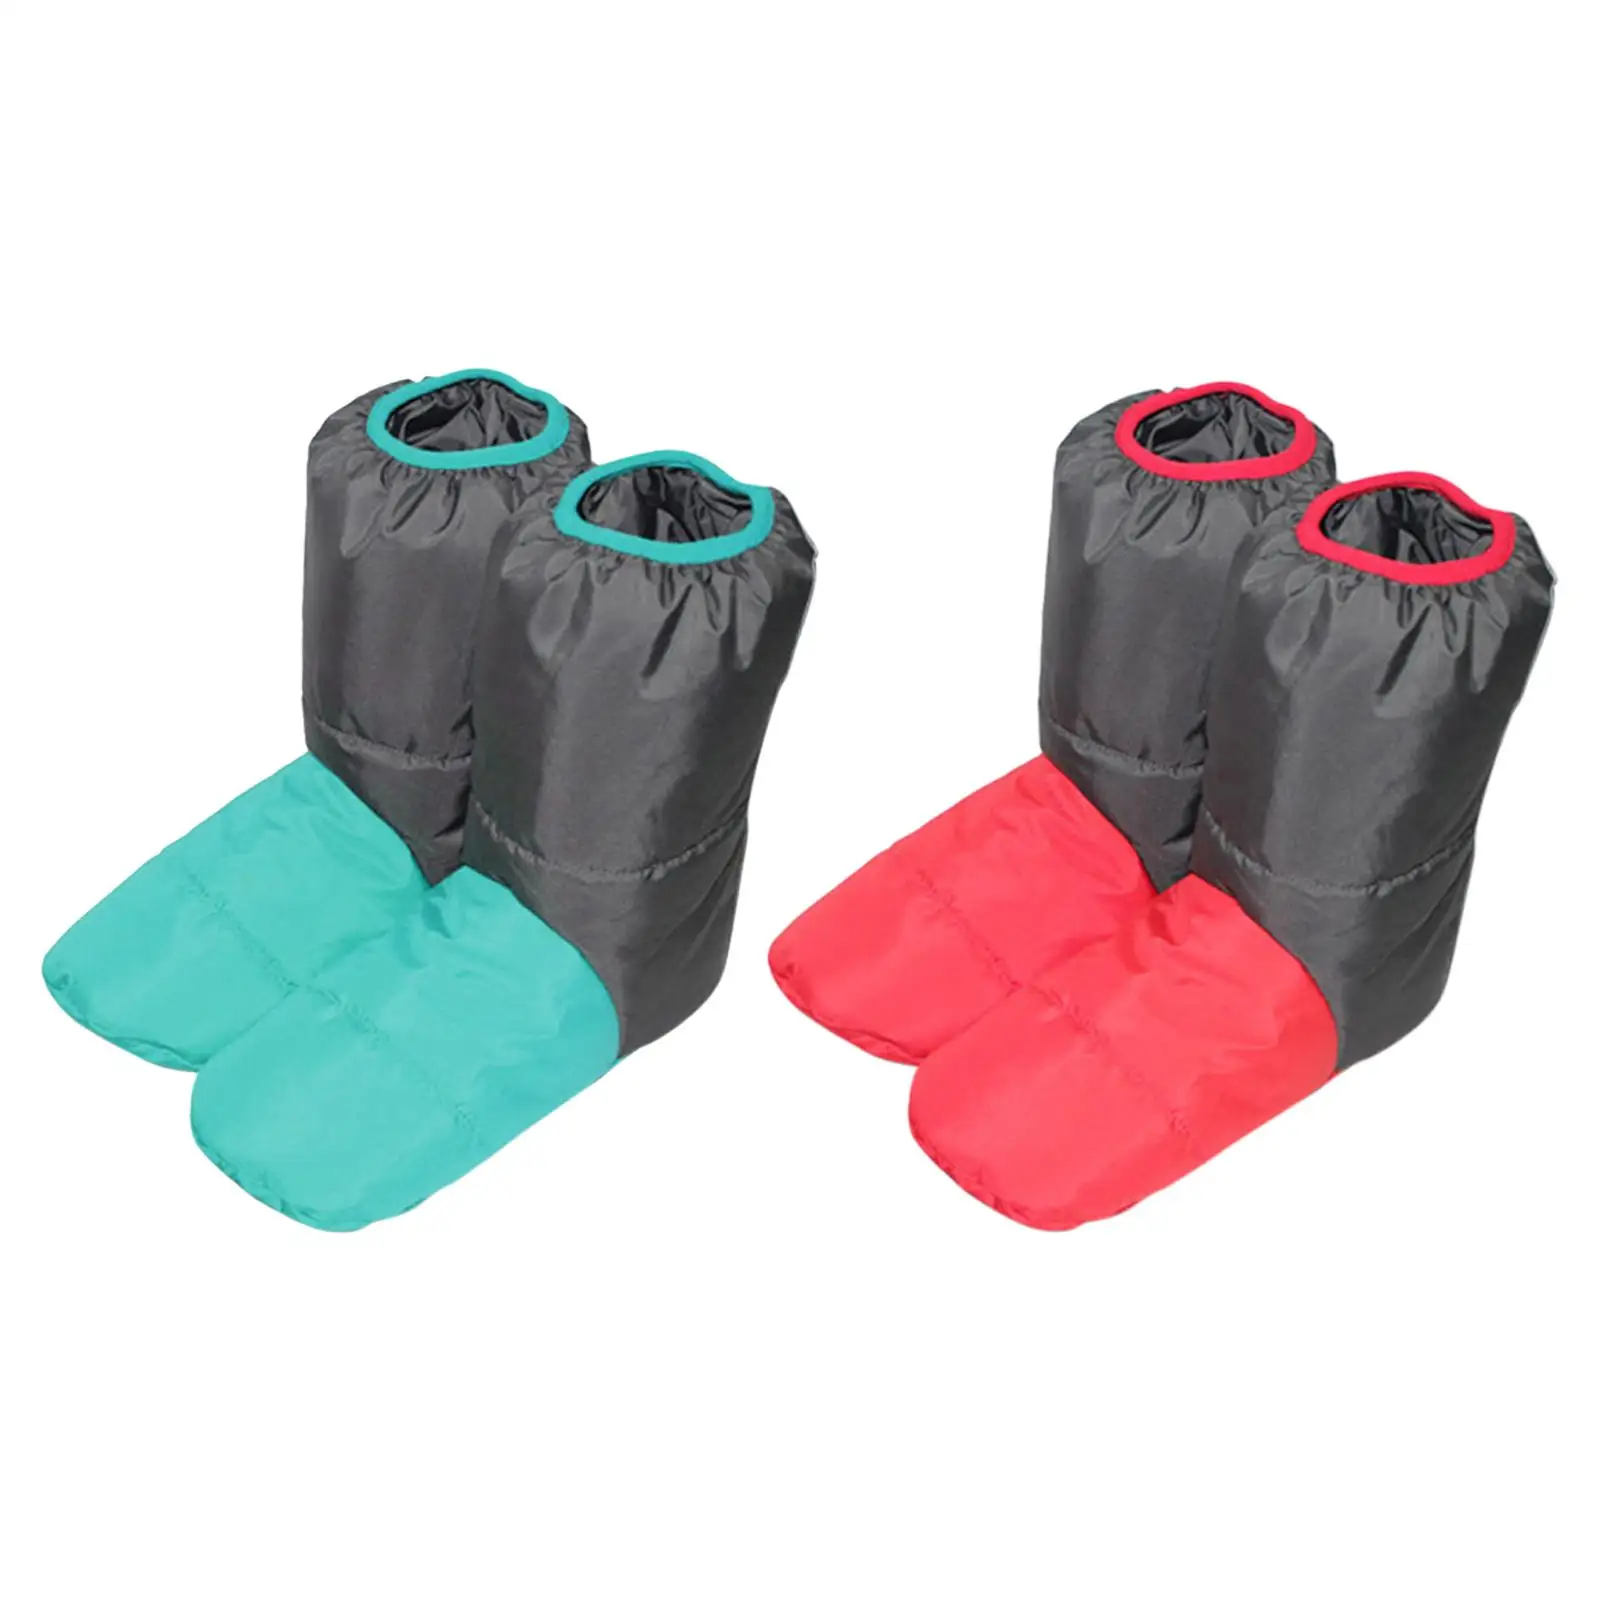 Down Booties Anti Skid Soft Warm Boots Foot Warmer Cover Sleeping Slippers for Camping Sleeping Bag Hiking Climbing Shoes